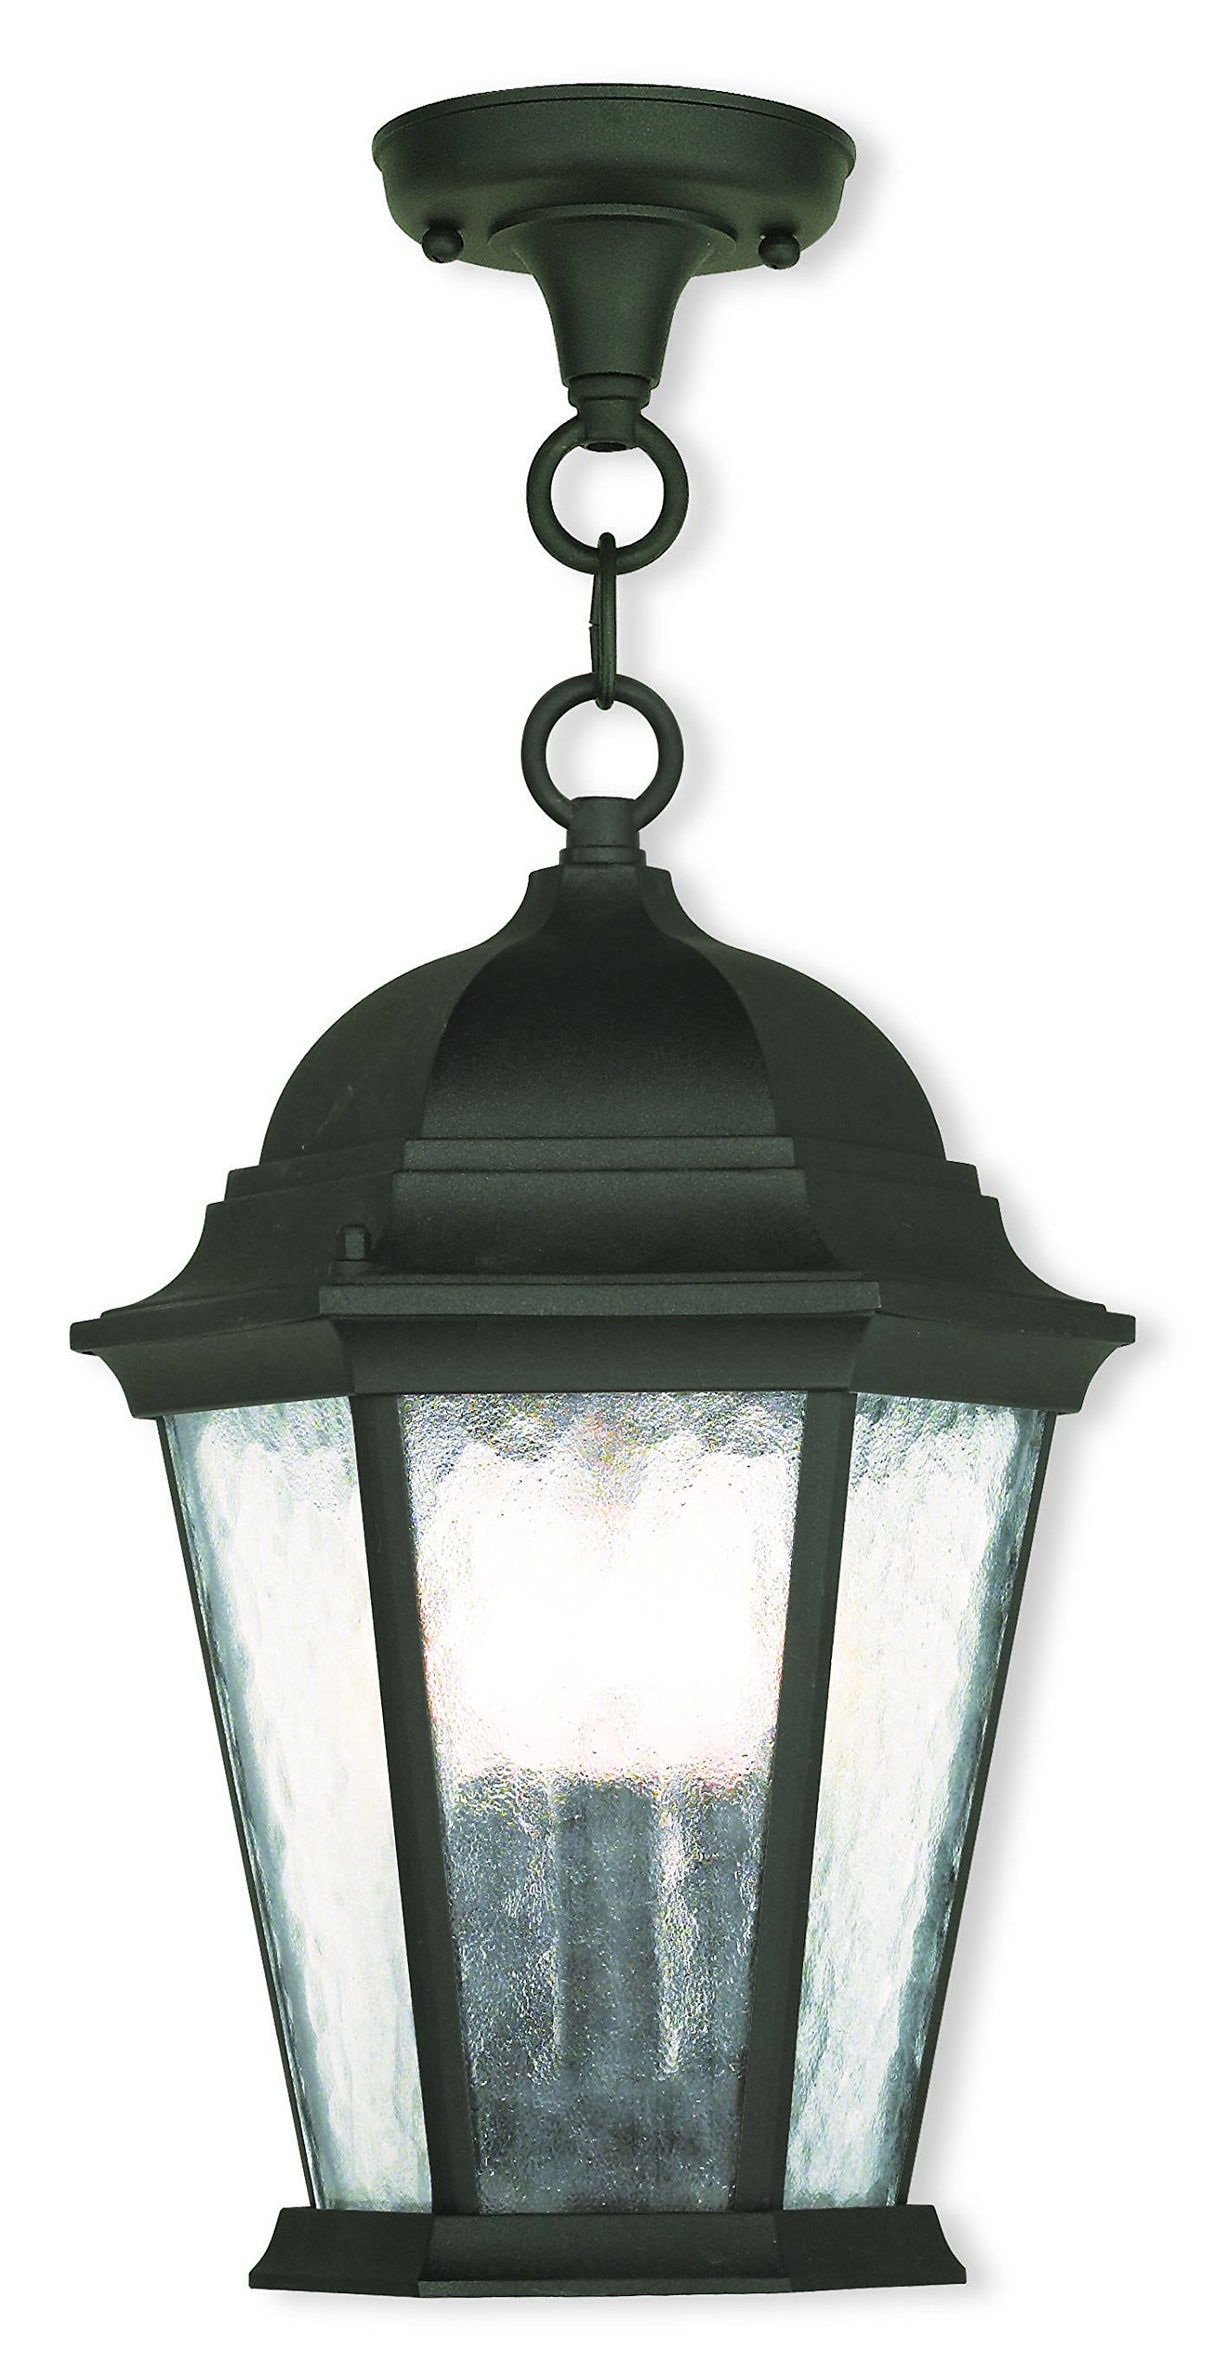 Livex Lighting 75469-14 Textured Black Outdoor Semi-Flush Mount with Clear Water Glass